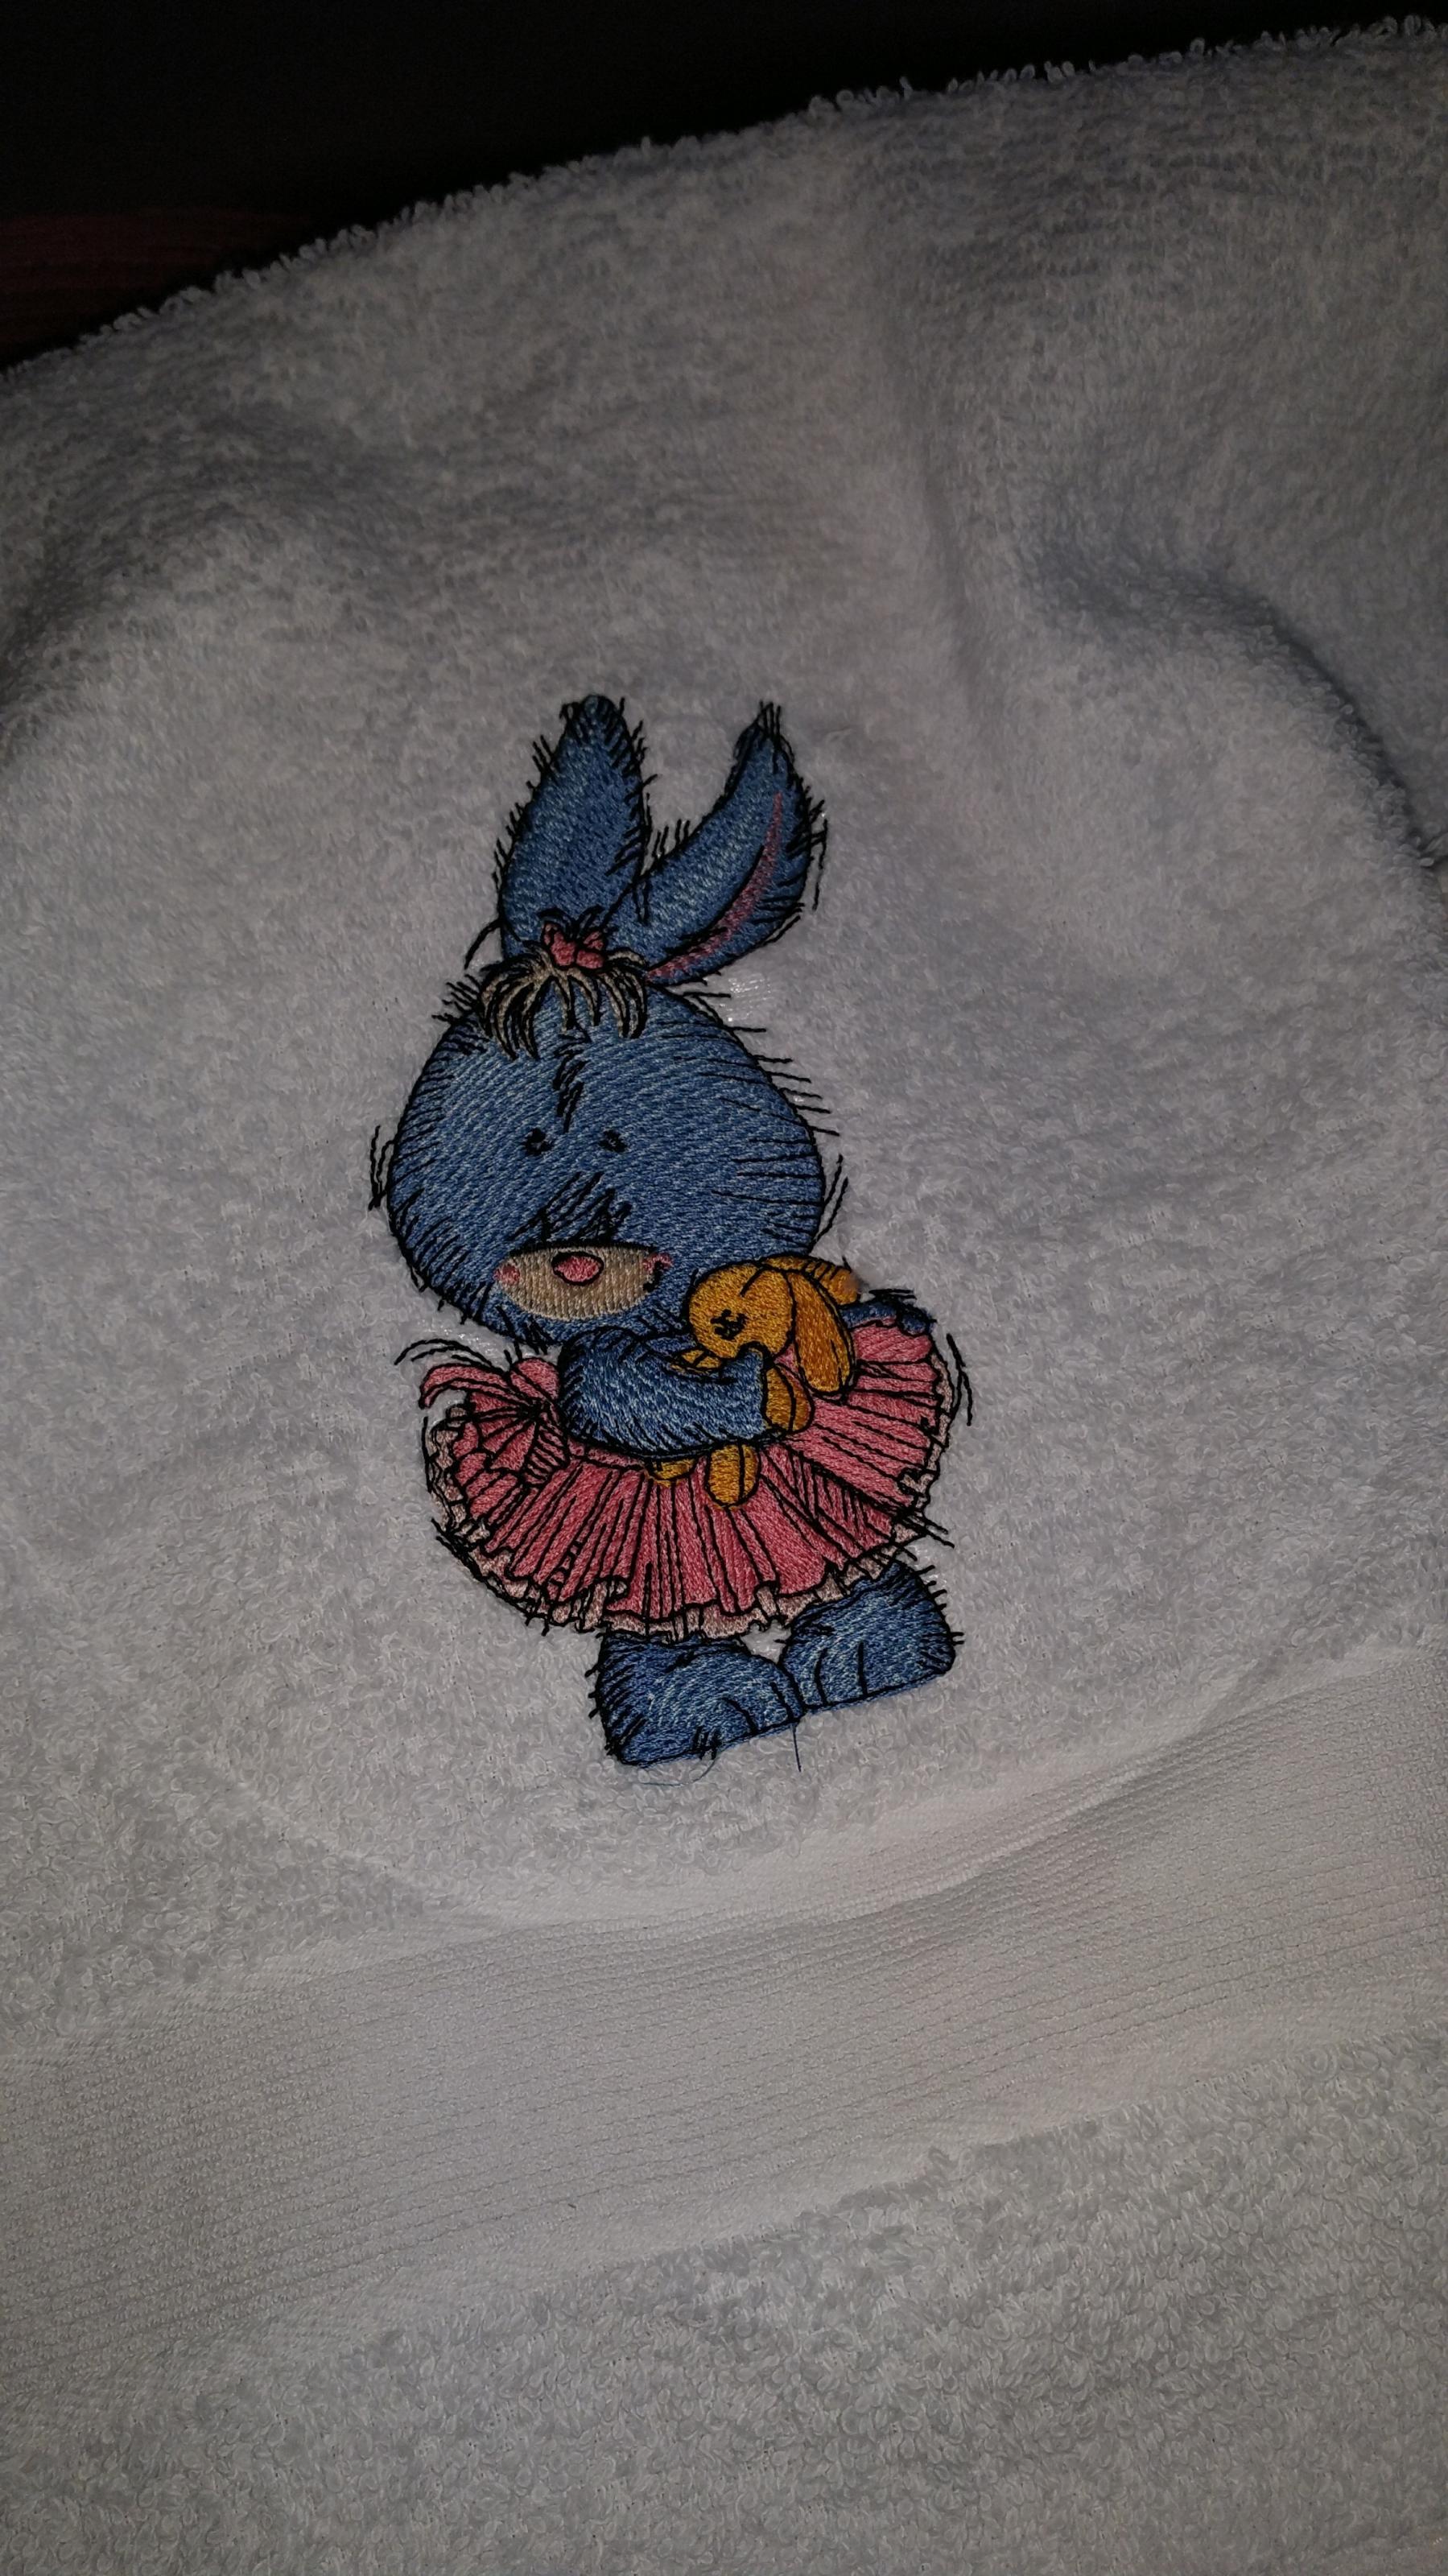 Embroidered towel with bunny in tutu